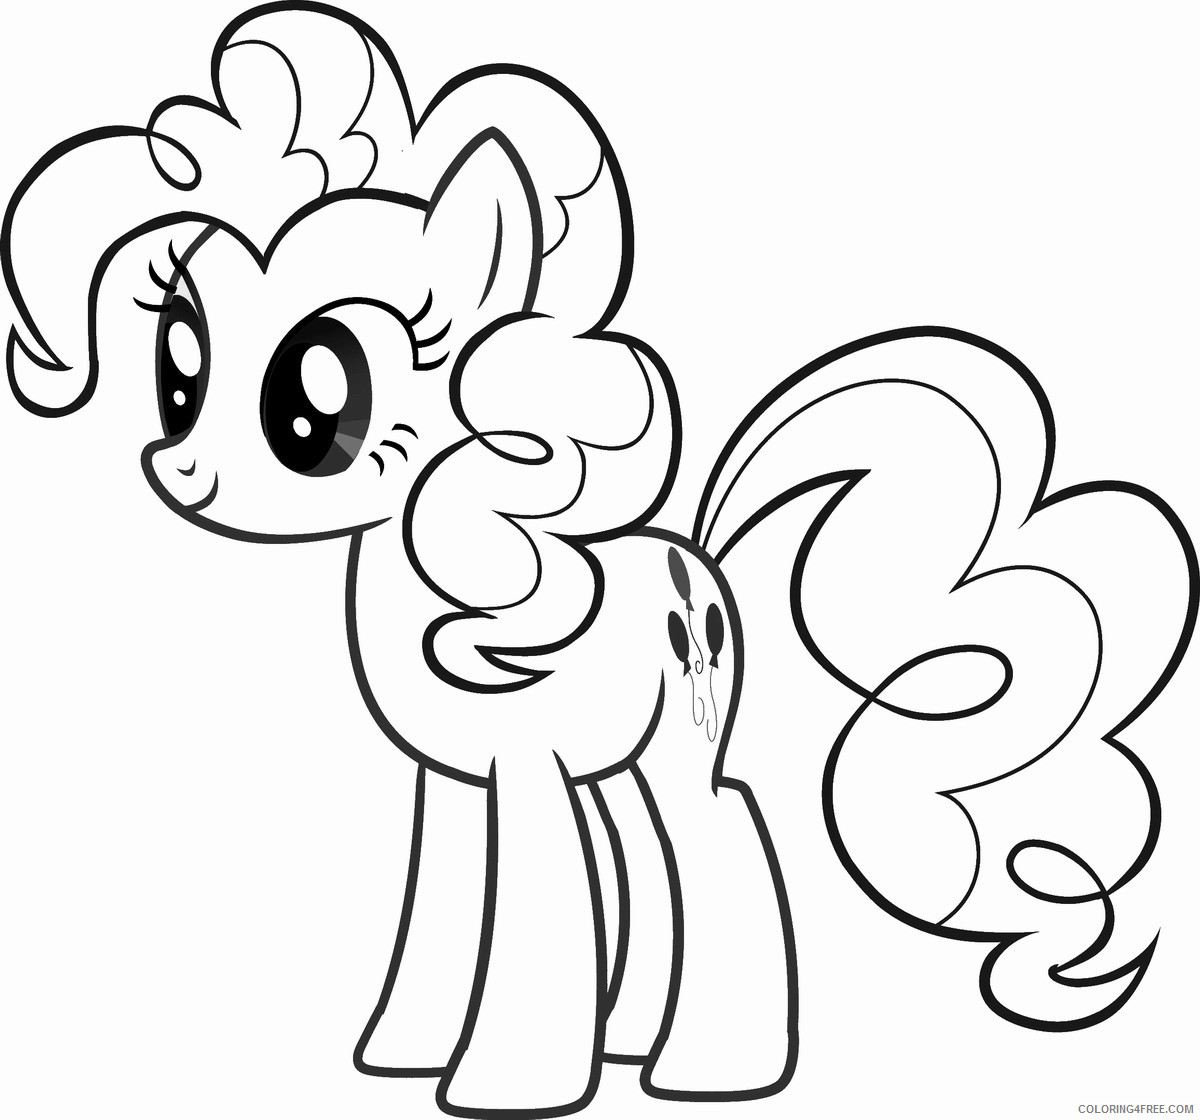 My Little Pony Coloring Pages Cartoons my little pony 8 Printable 2020 4474 Coloring4free